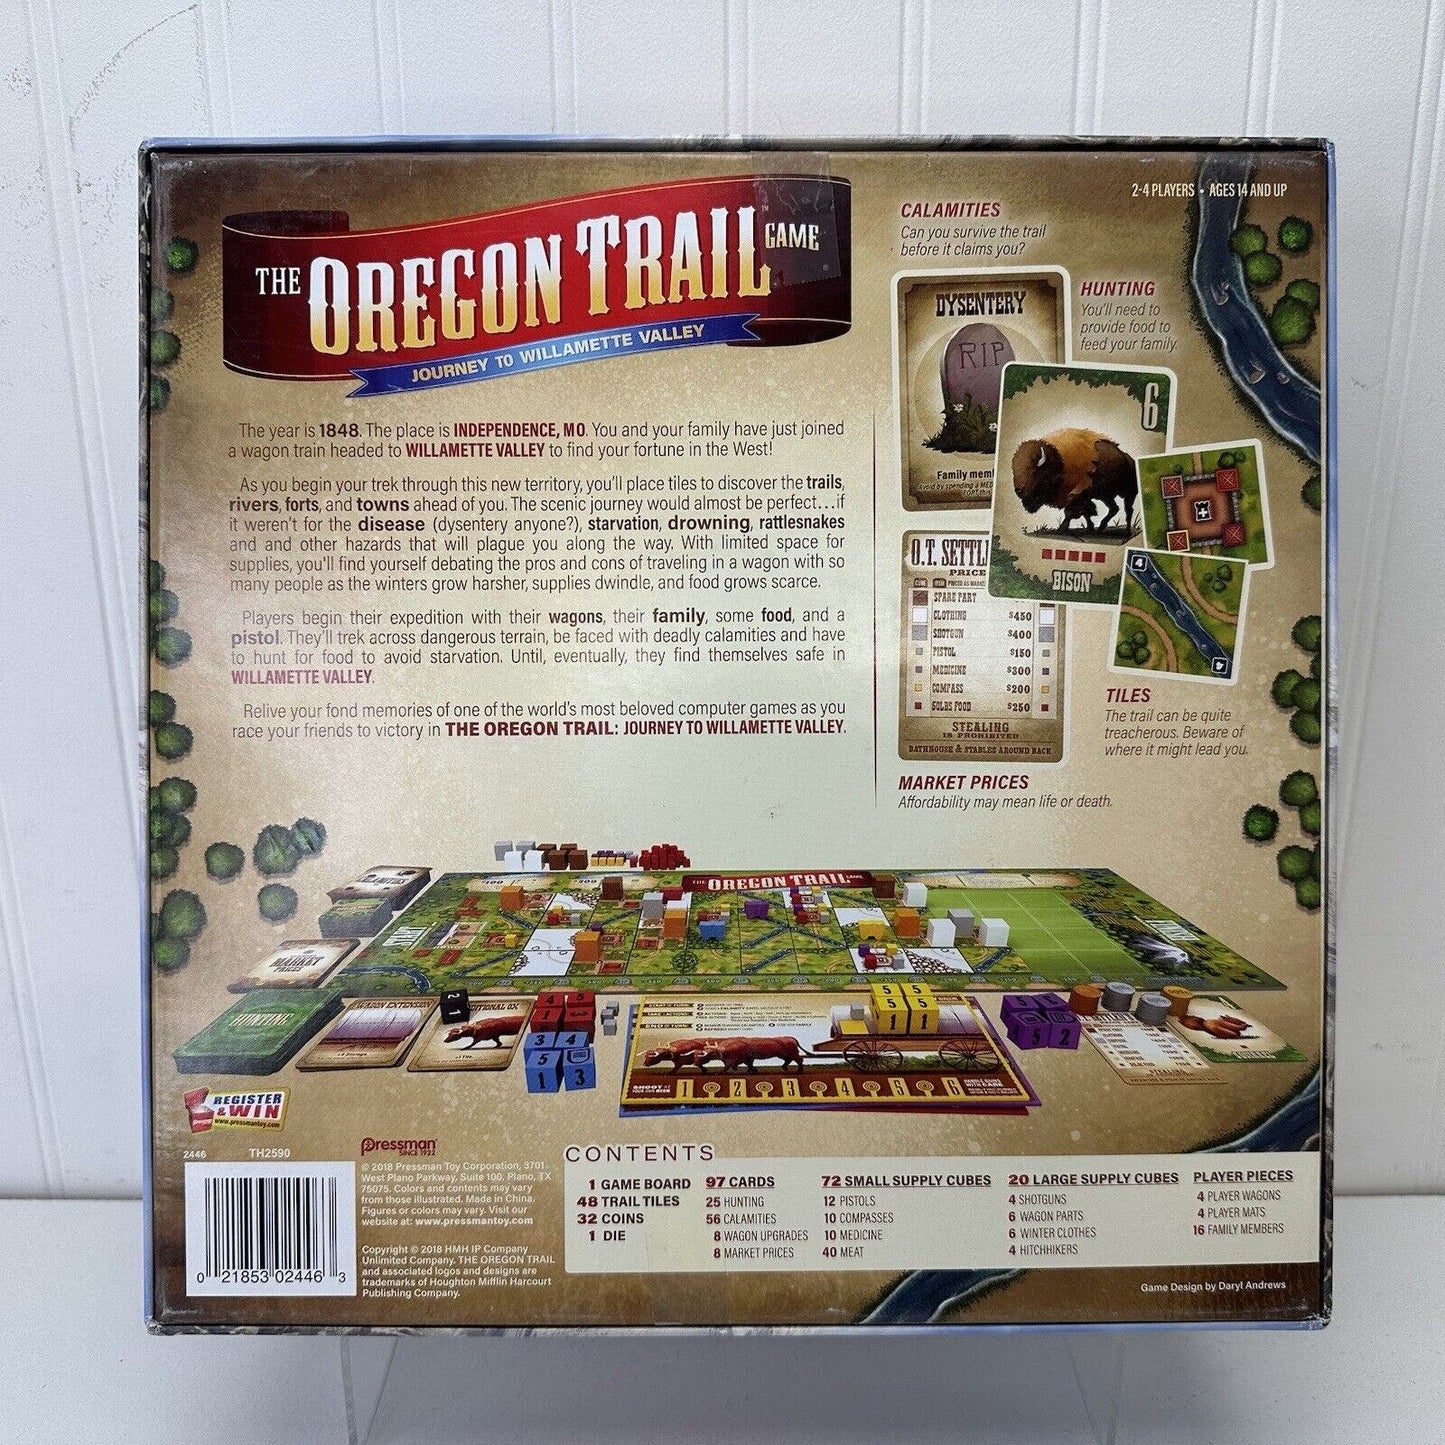 Pressman - The Oregon Trail Game “Journey to Willamette Valley” 100% Complete